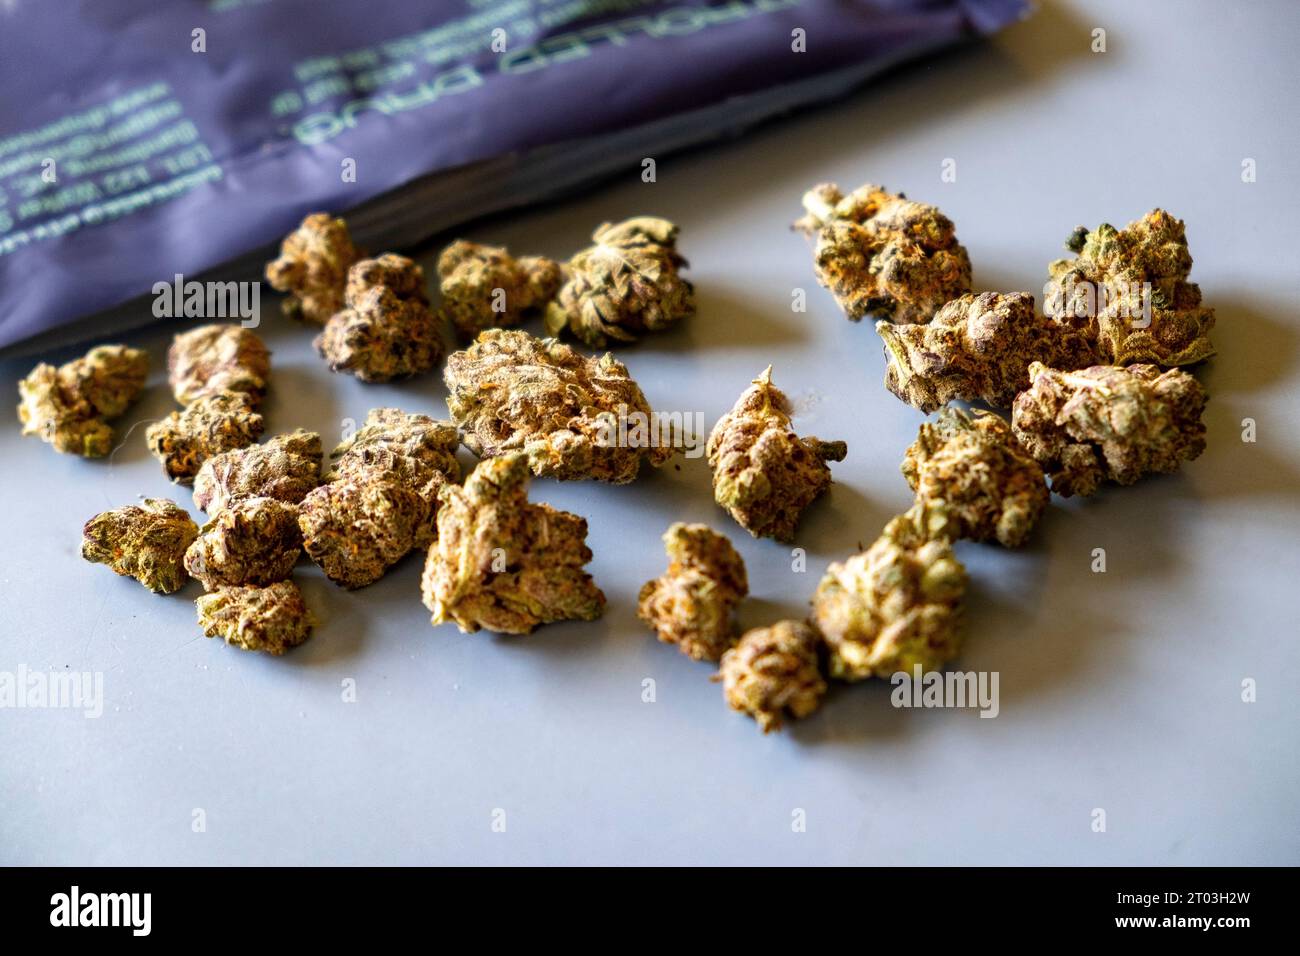 Medically prescribed cannabis grown and packaged in Canada and imported for Australian use Stock Photo